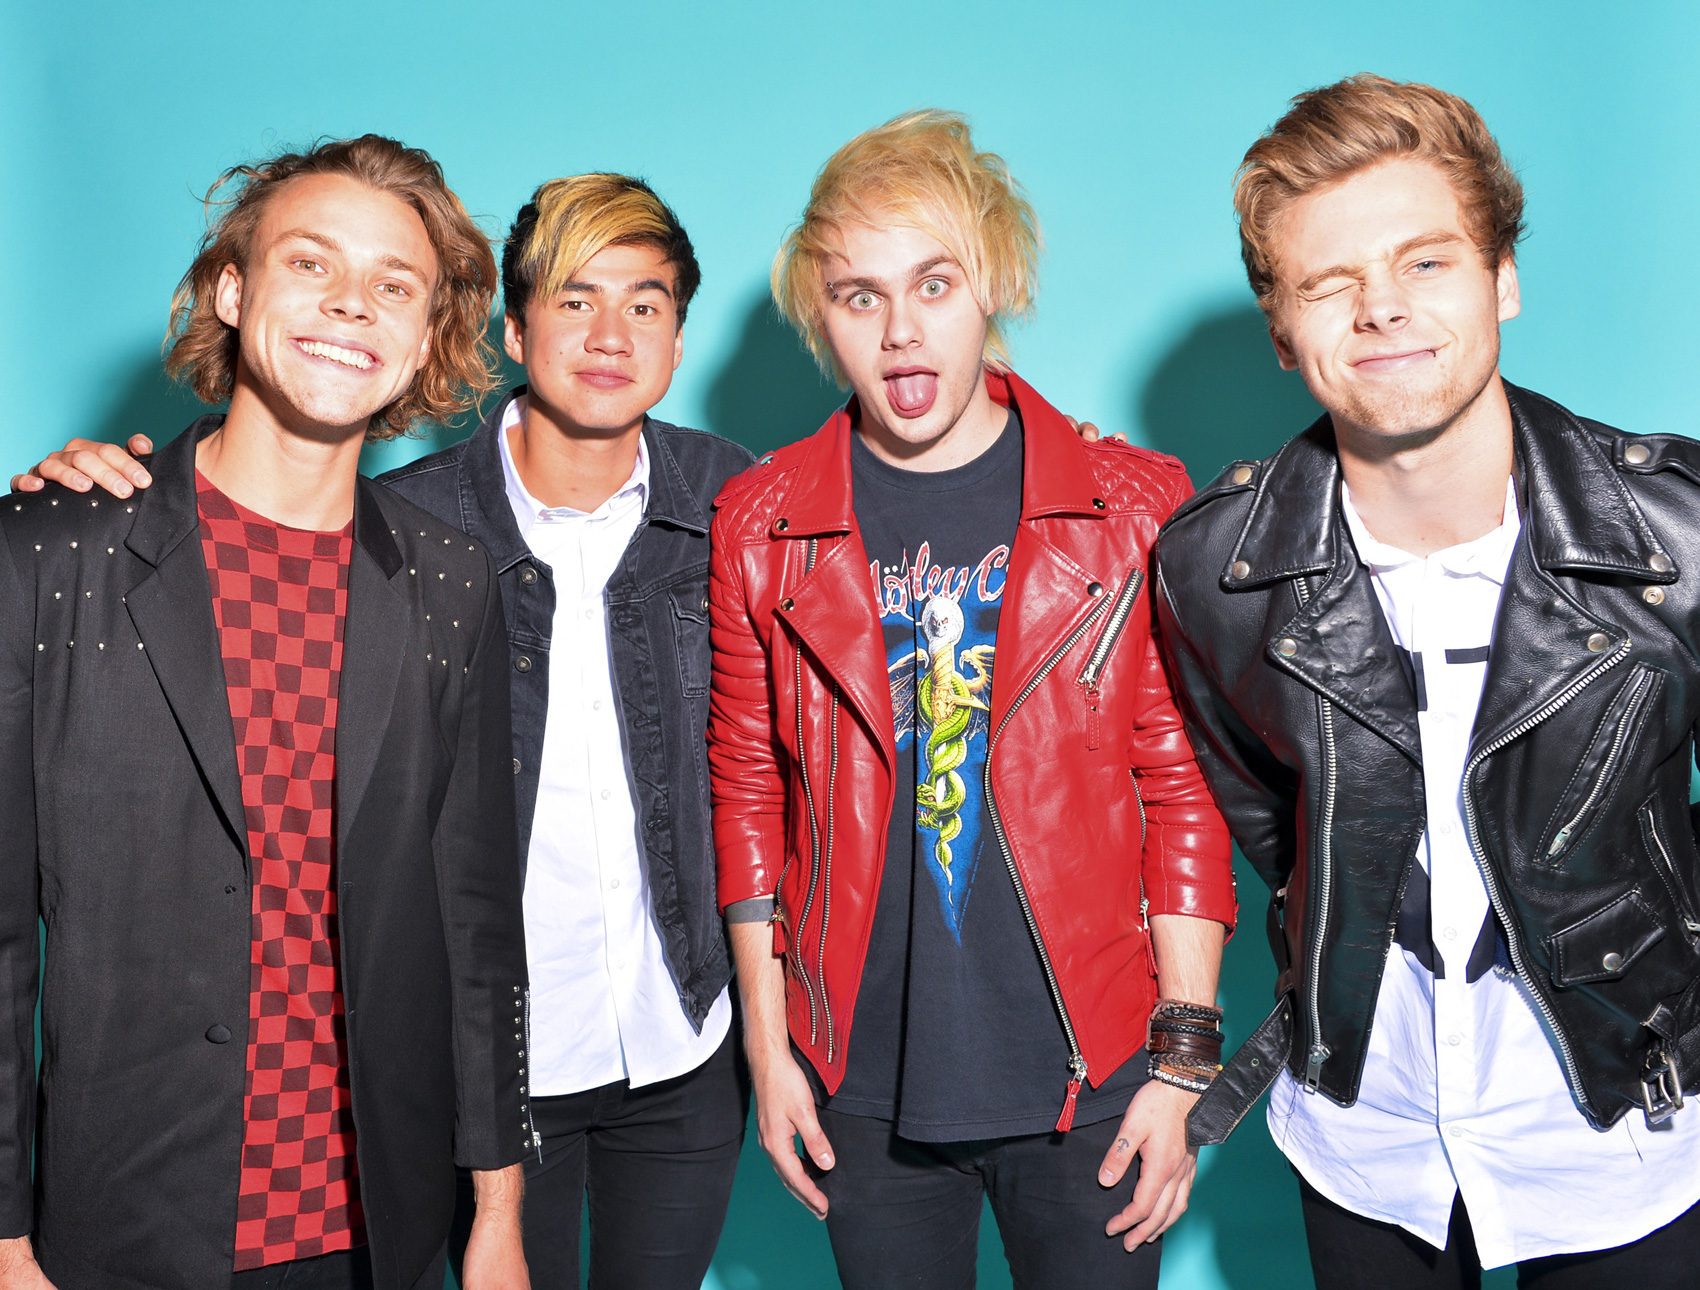 Five all-ages winter shows from 5SOS